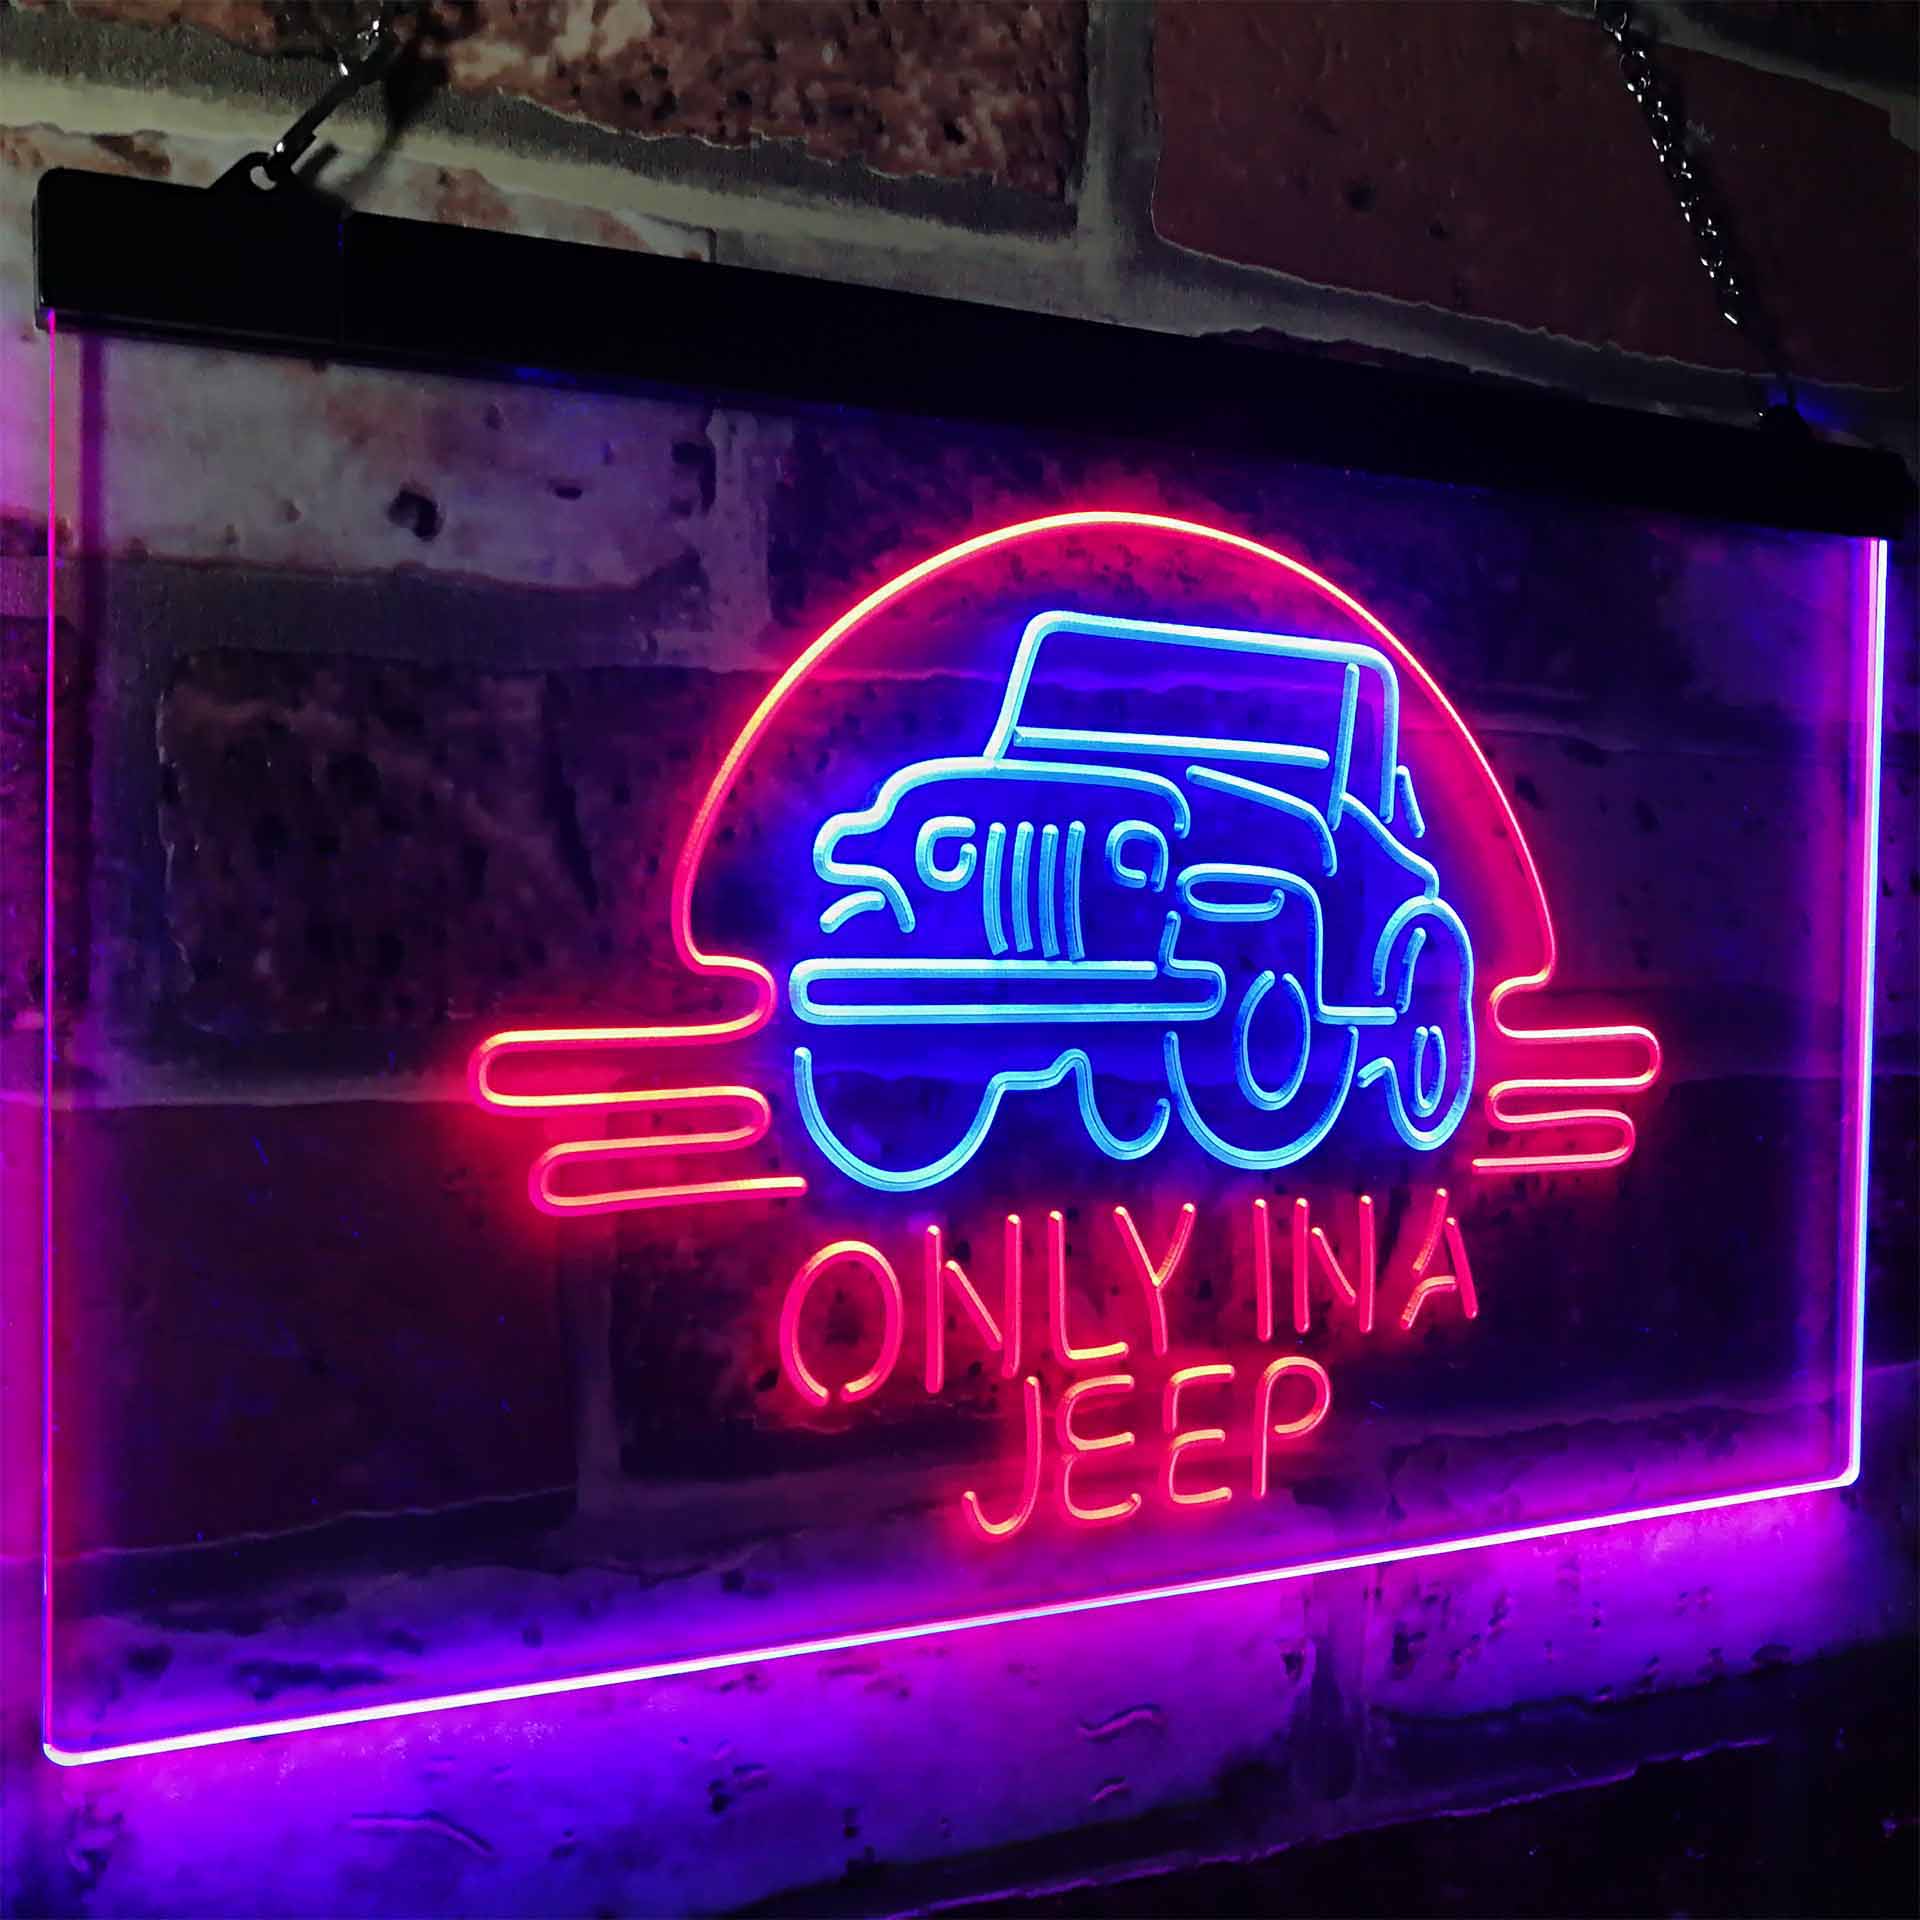 Only in a Jeep Car Man Cave LED Neon Sign